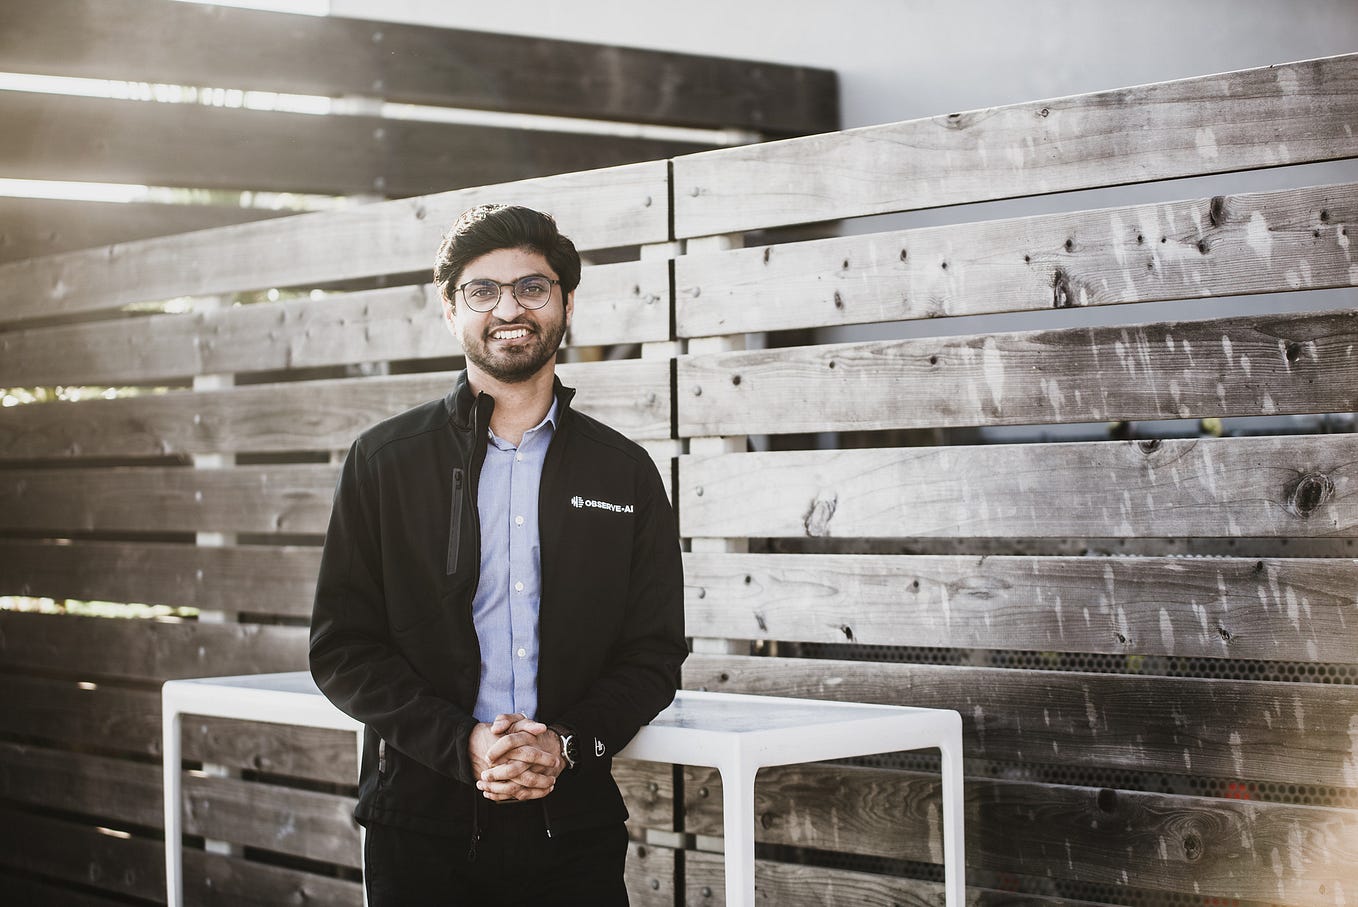 Swapnil Jain of Observe.AI: How To Take Your Company From Good To Great